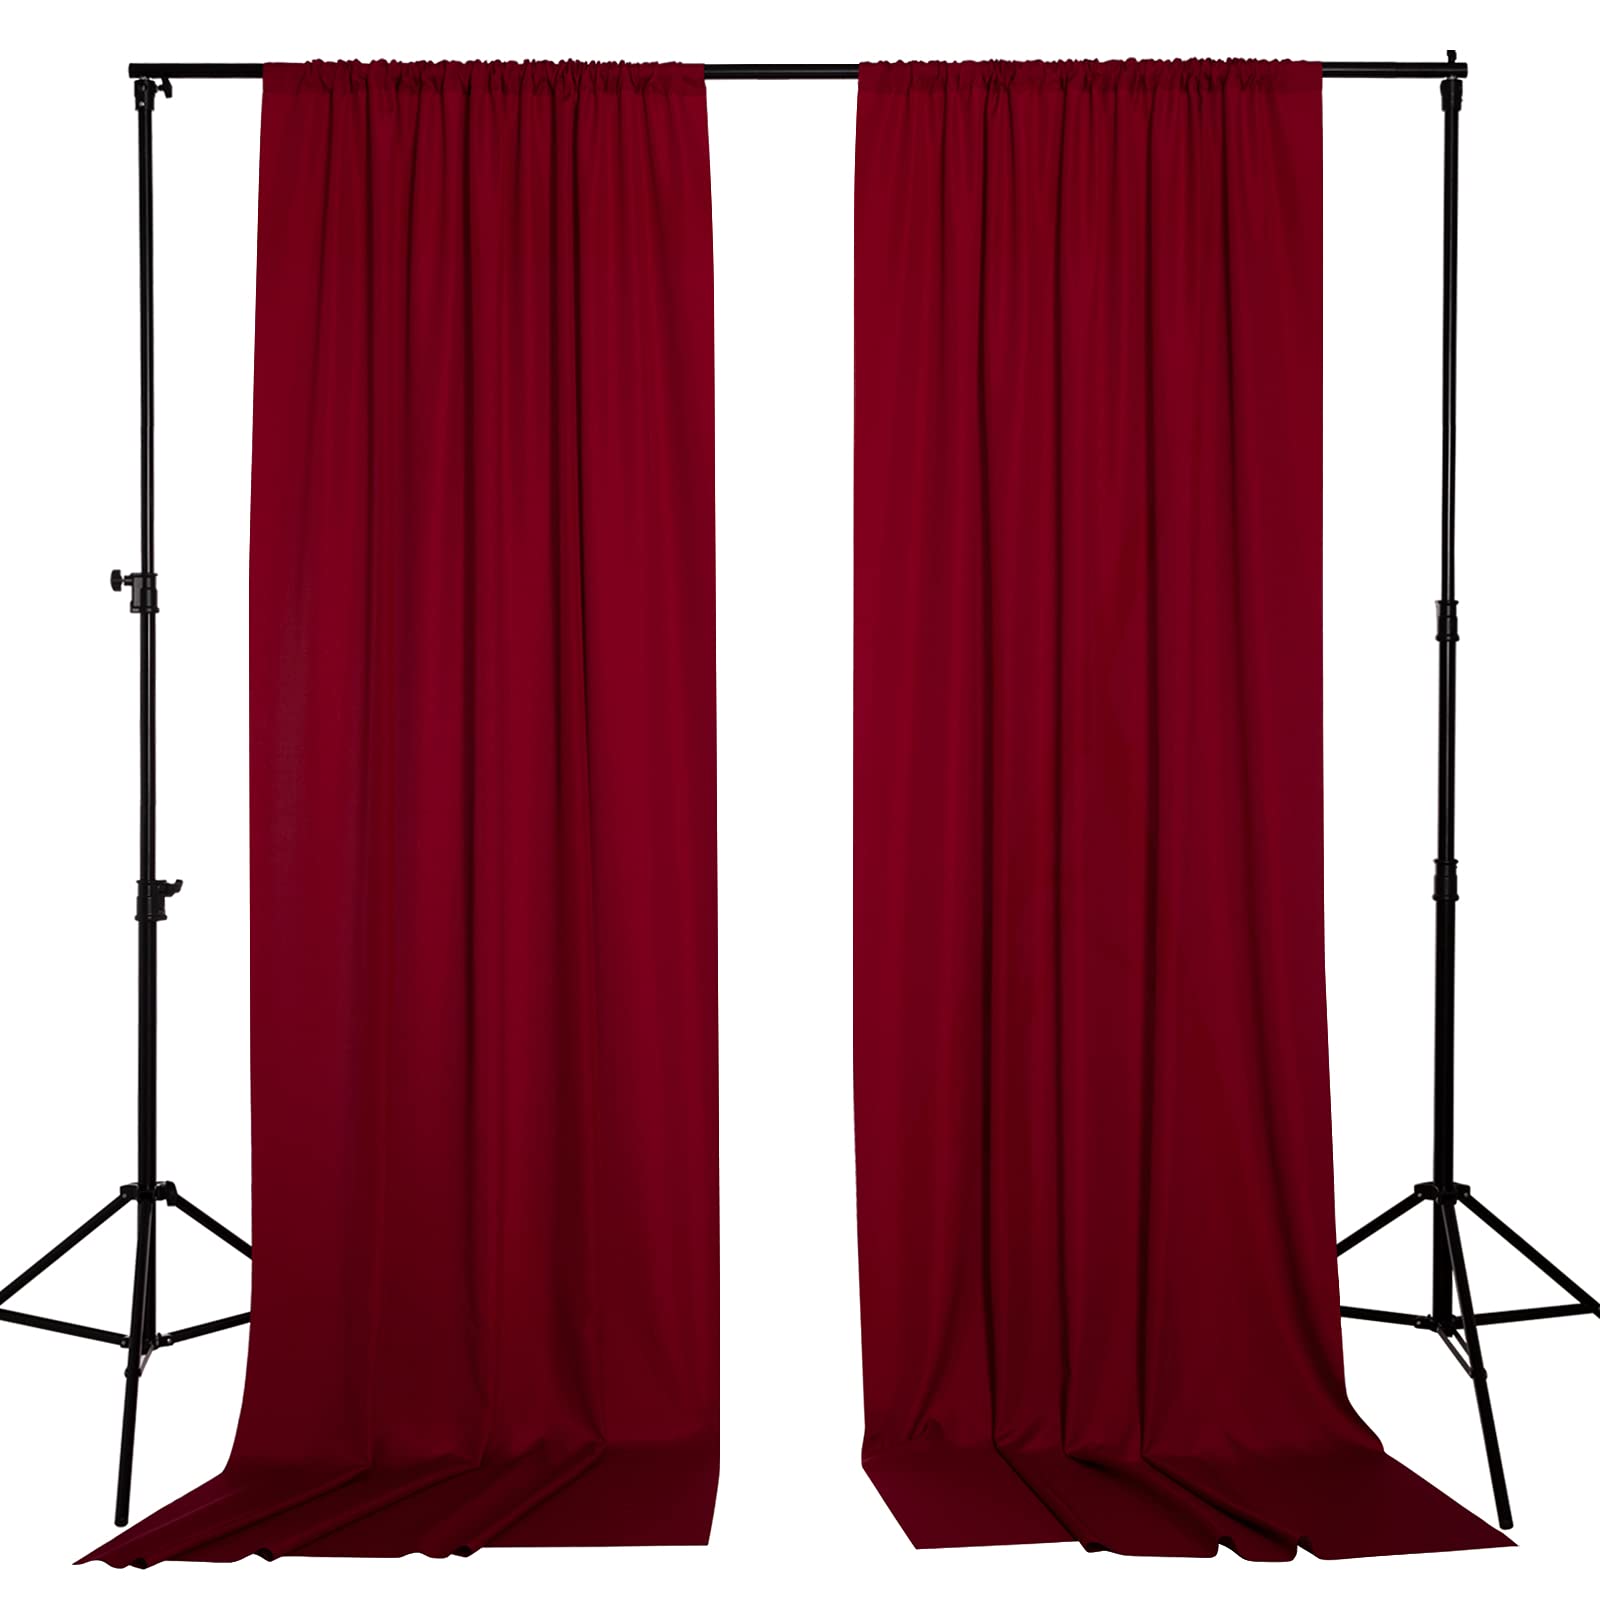 5 x 10 ft Backdrop Curtains for Parties Waterproof Home Theater Studio Backgrounds Wedding Stage Stand Panels 2 Panels